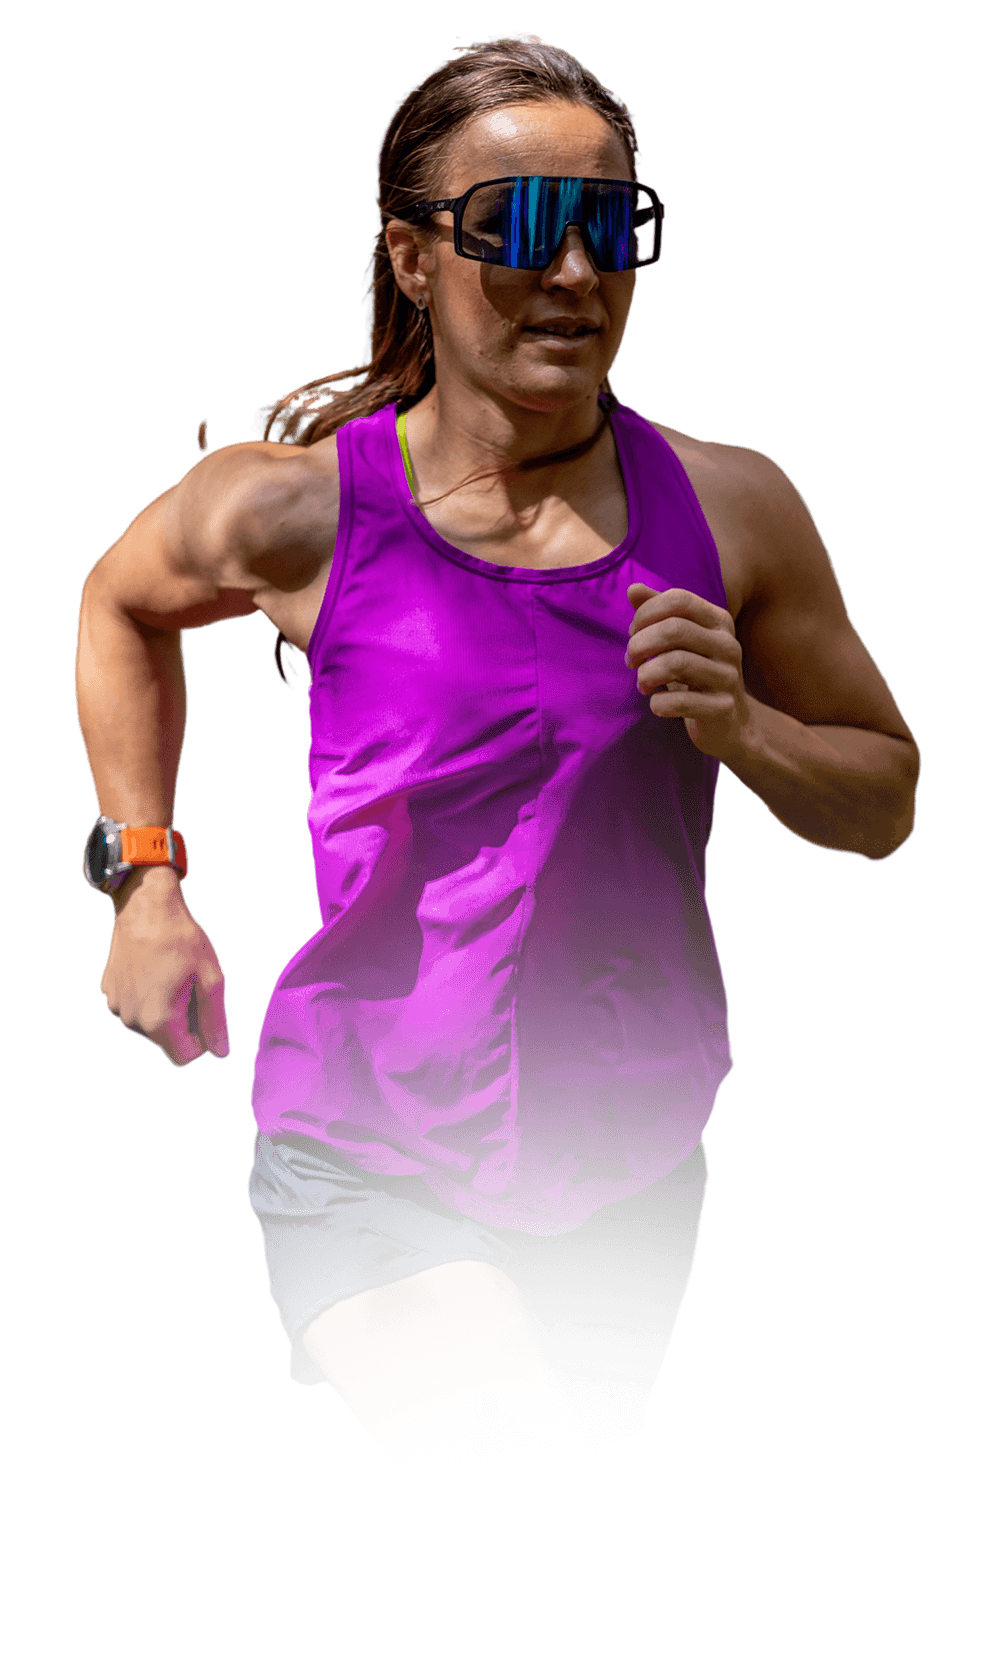 Coach Fanny running, wearing sports glasses and purple sports top